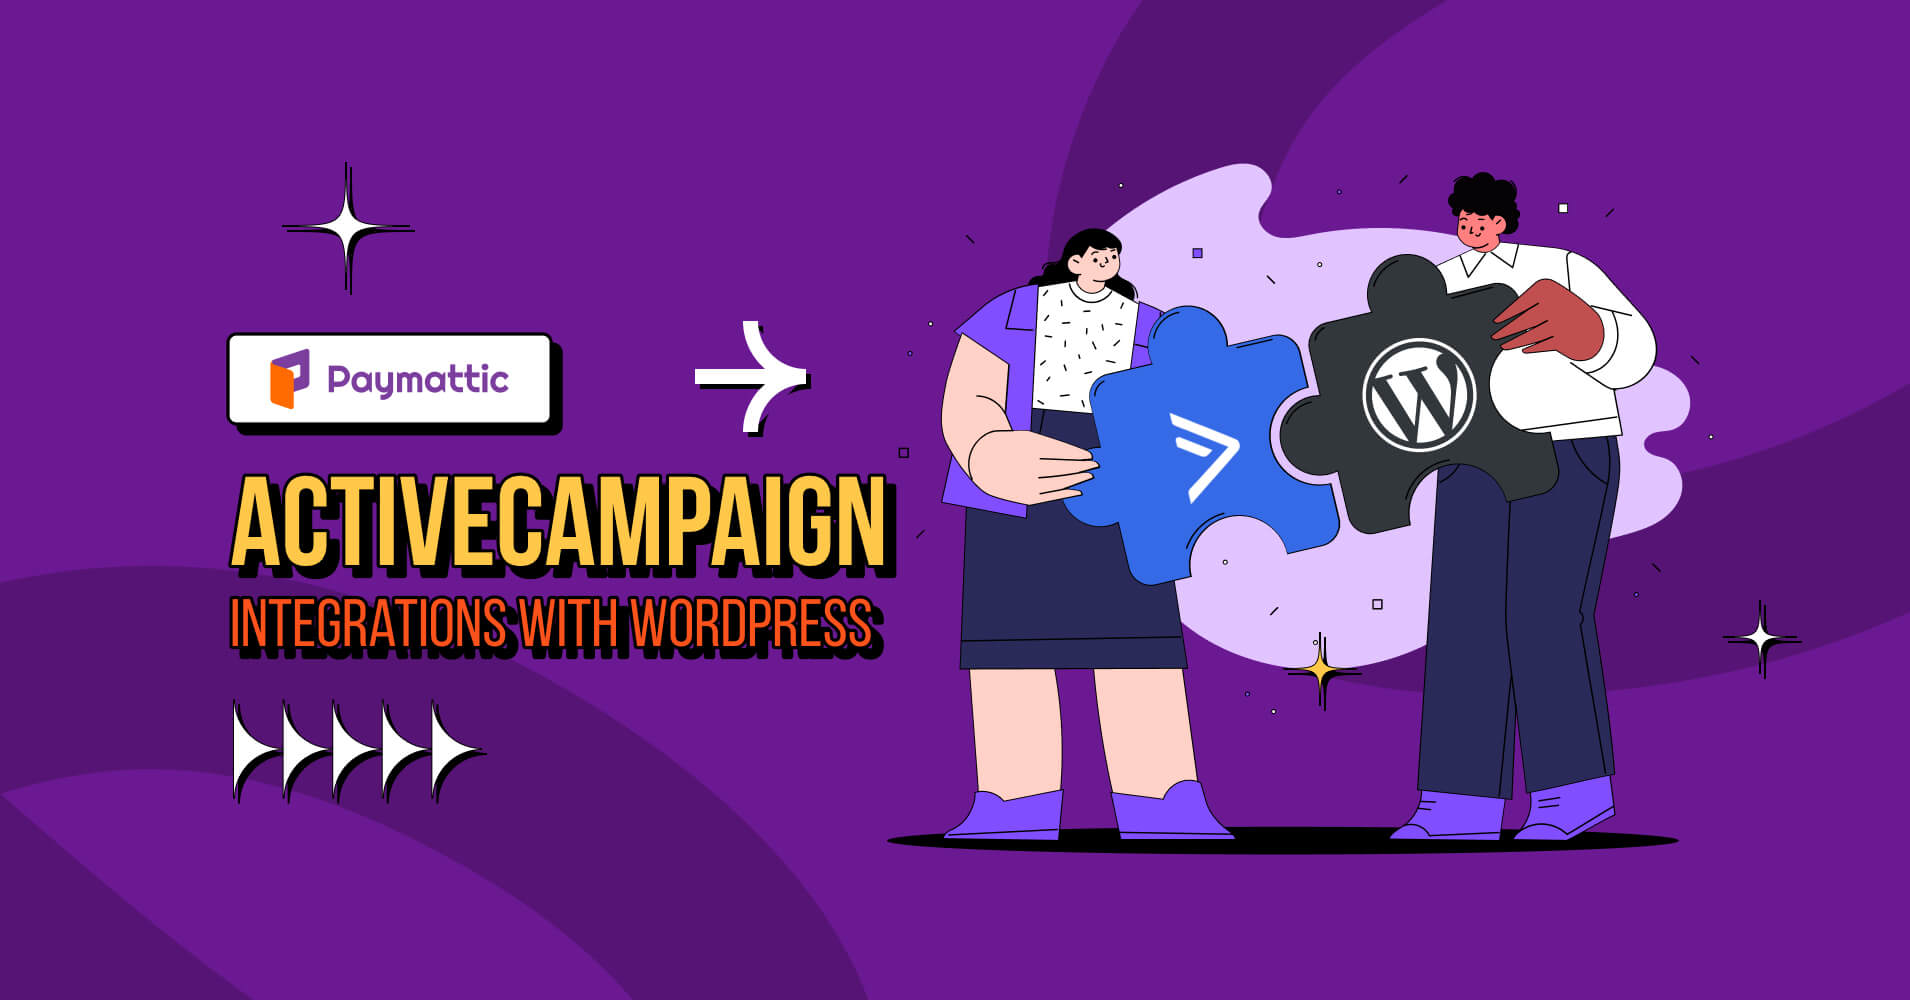 ActiveCampaign Integrations with WordPress (1)